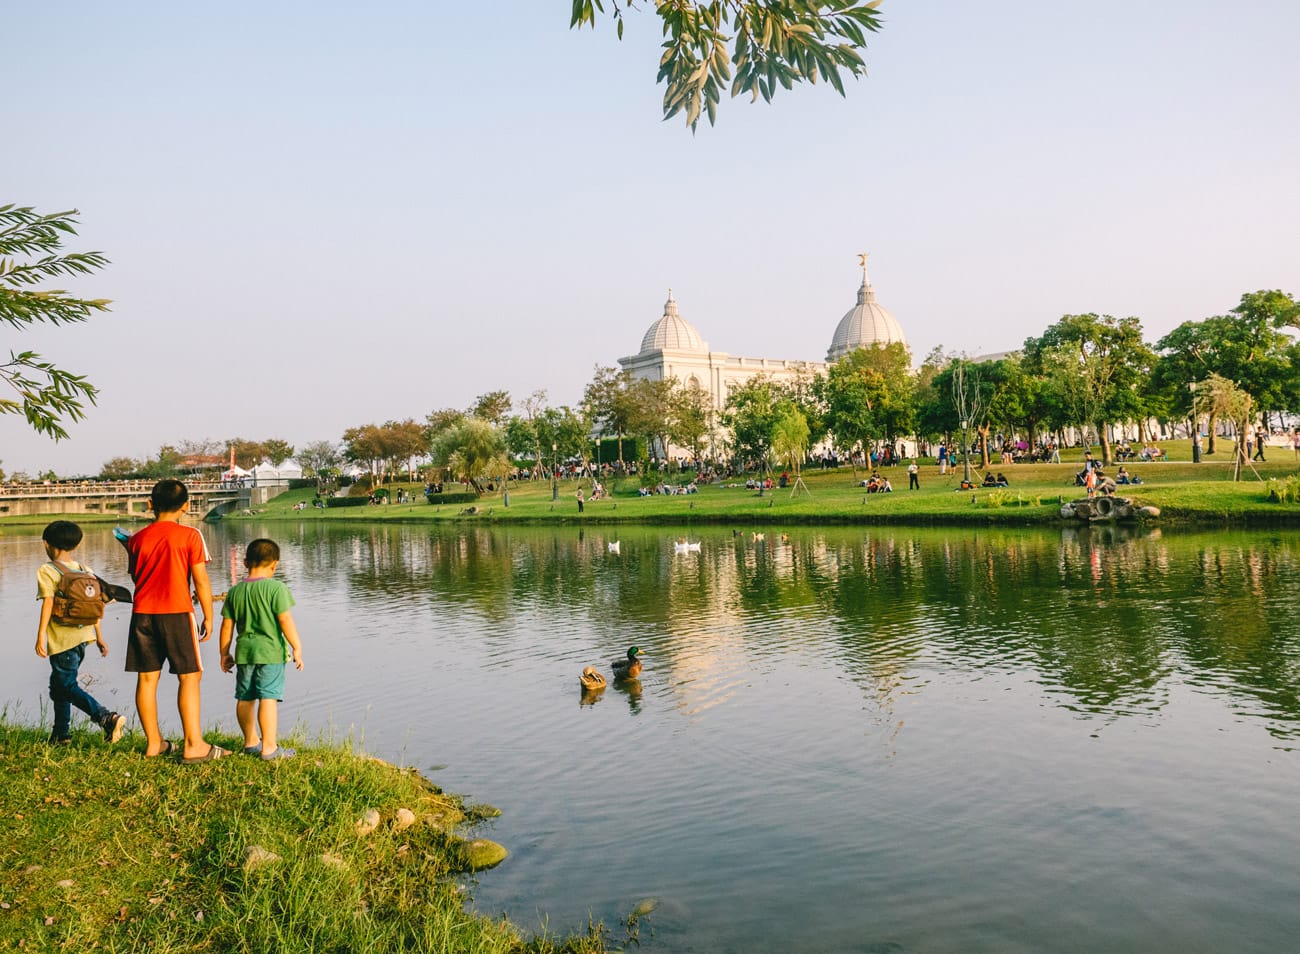 Tainan - Pokemon Go Safari Event - View of the Chimei museum from the lake